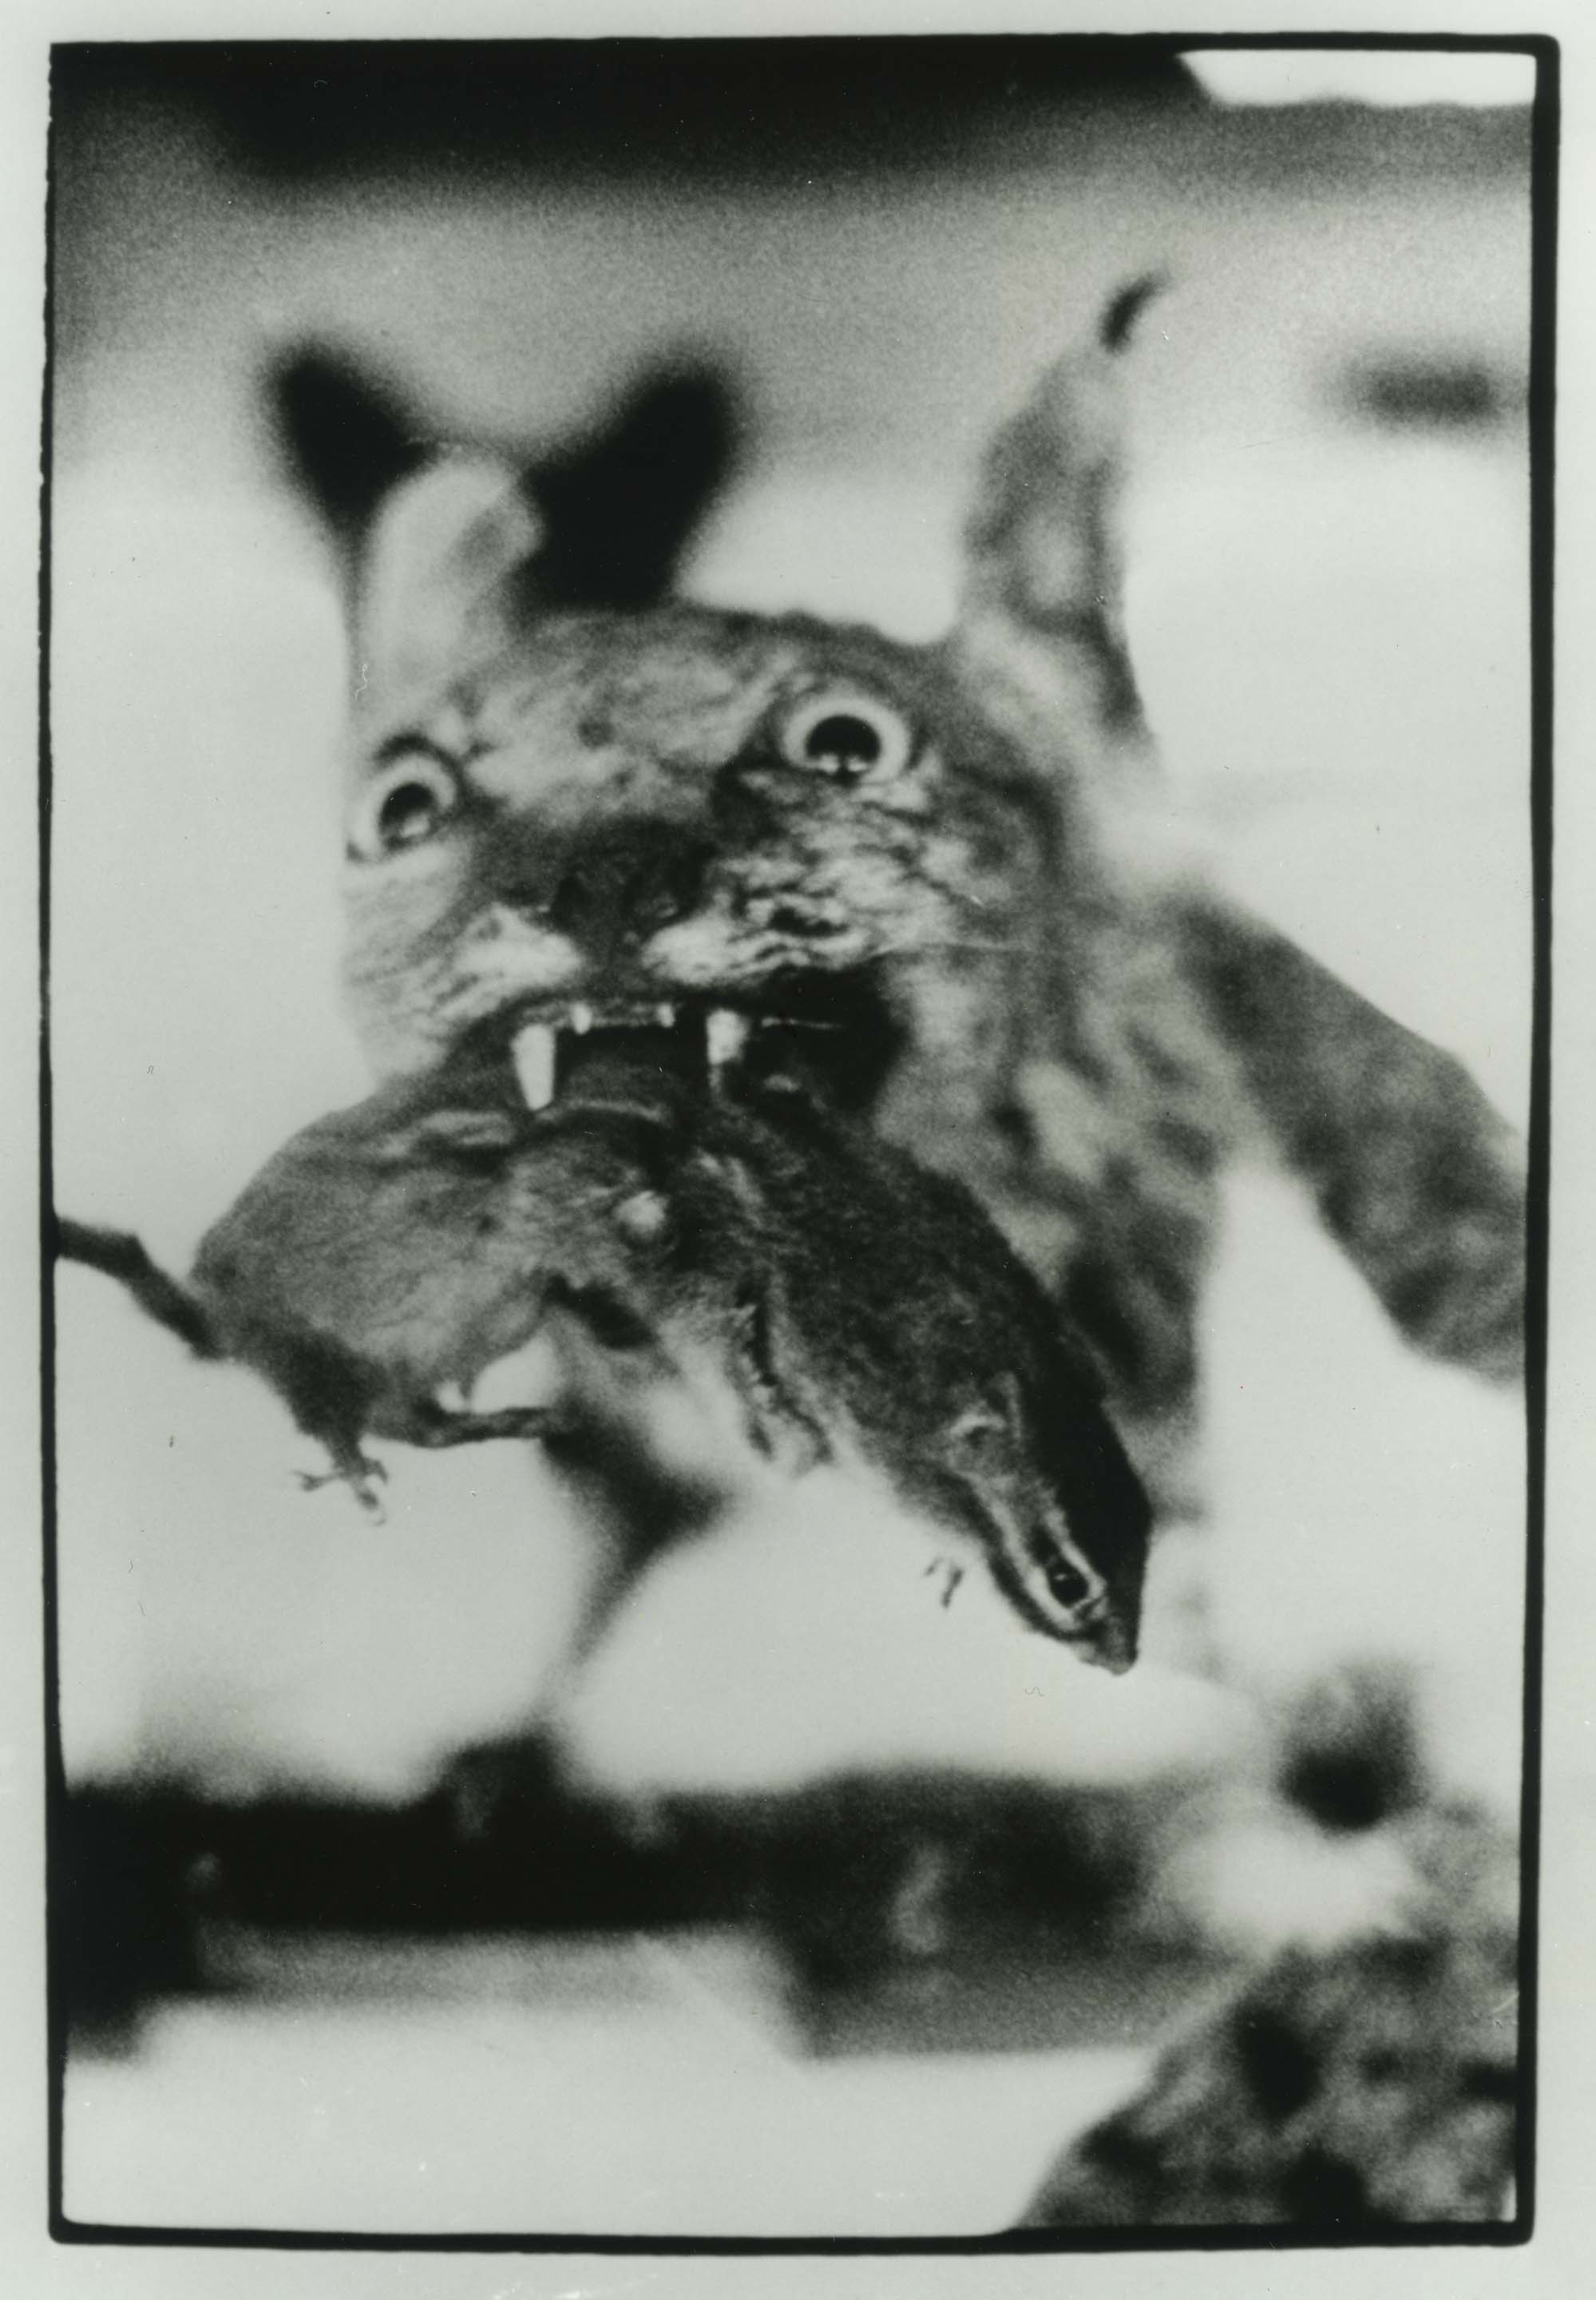 In a black-and-white photo, a leaping cat's face is in focus, piercing a shrieking rodent with its fangs.